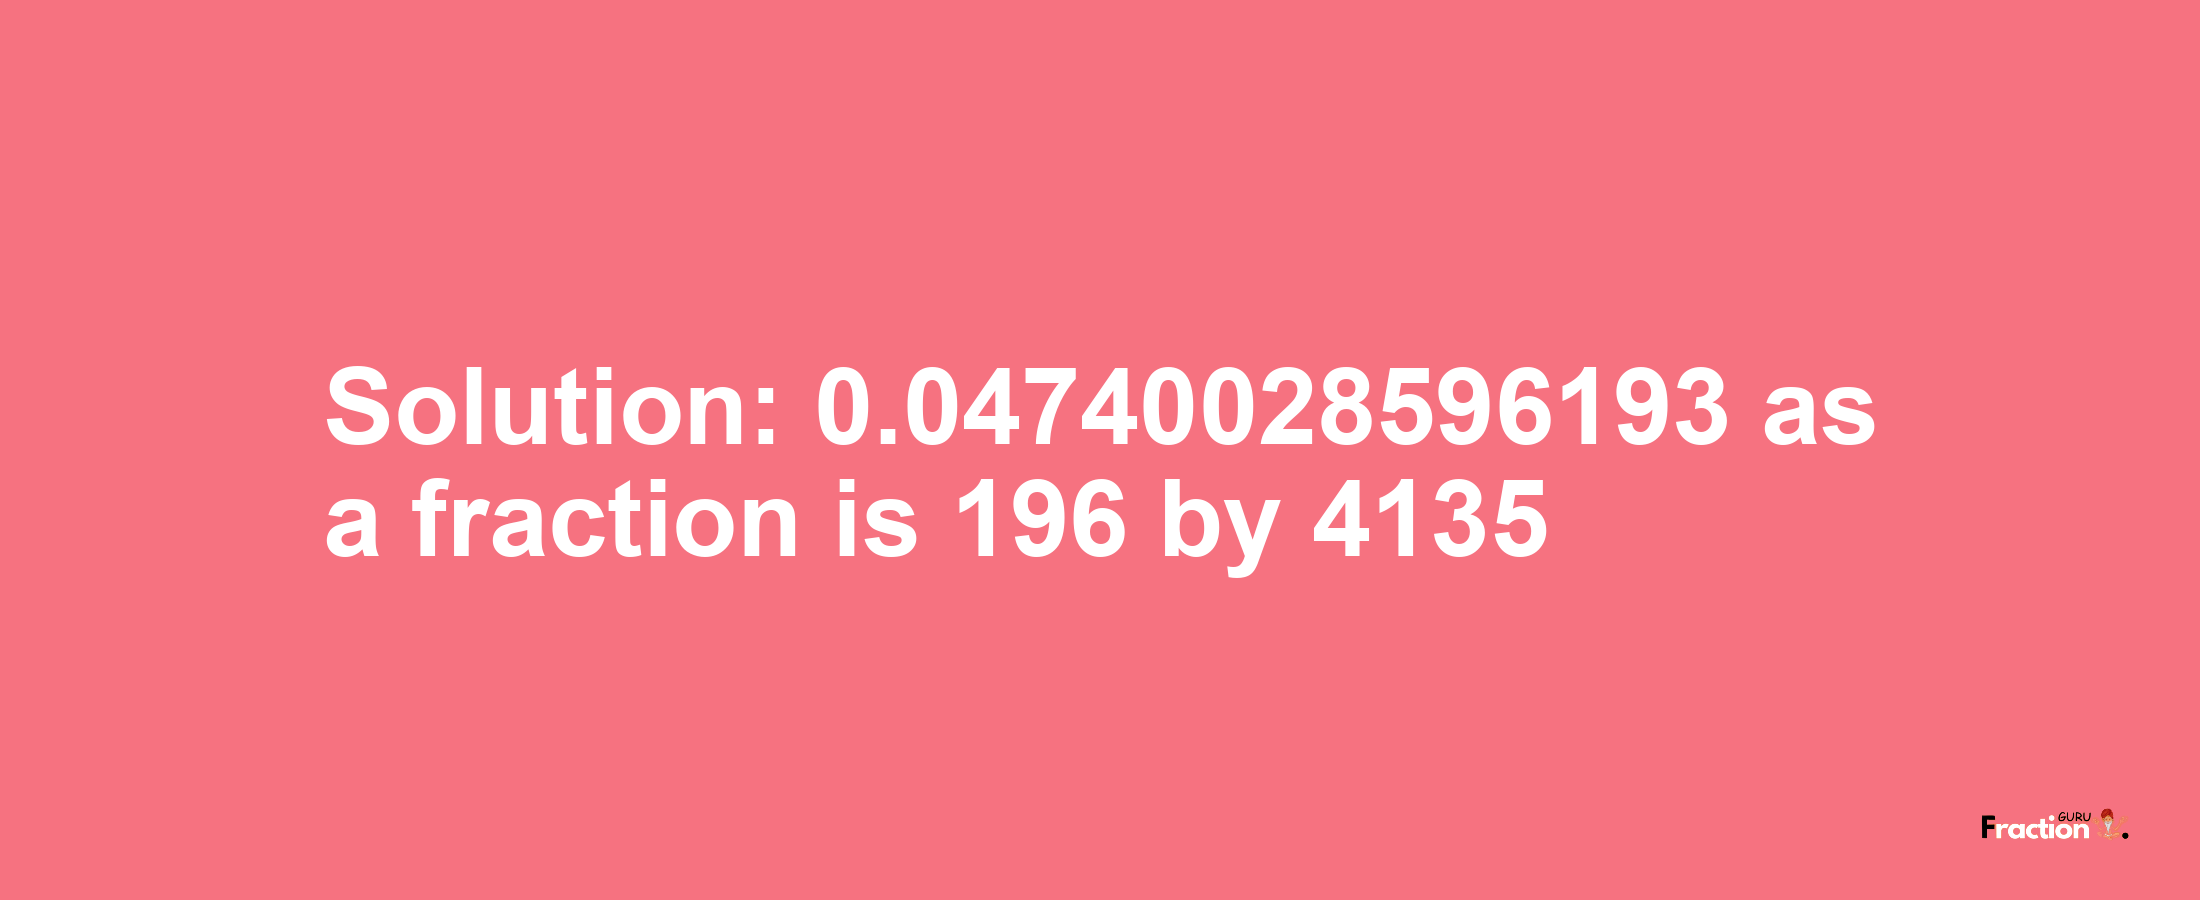 Solution:0.04740028596193 as a fraction is 196/4135